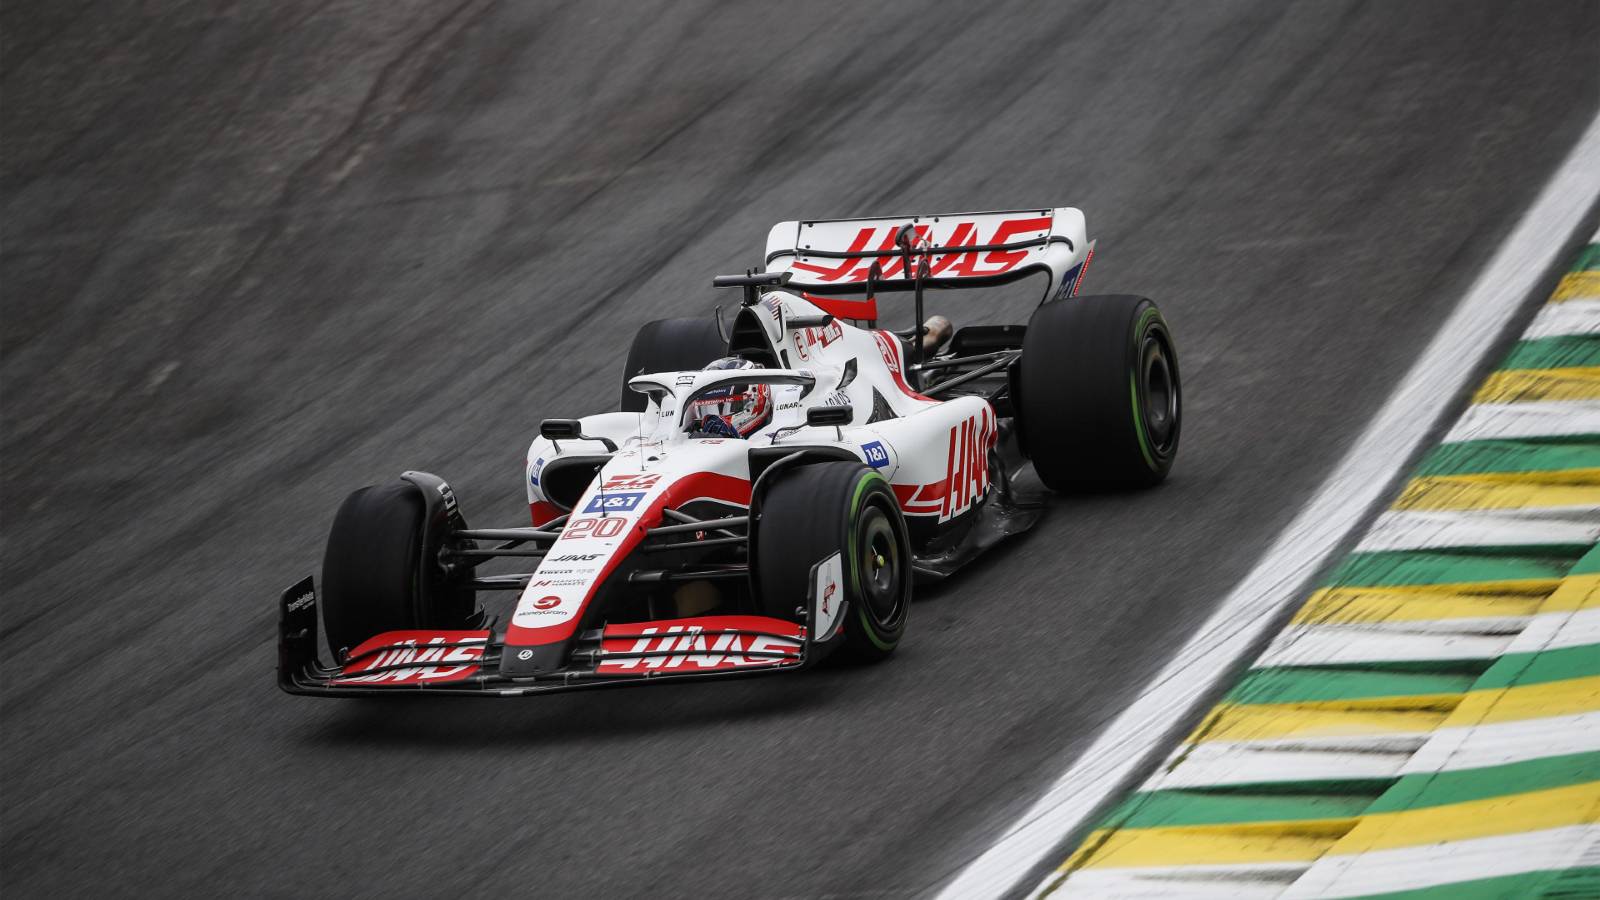 Qualifying for the F1 in Brazil is forecast to be rainy